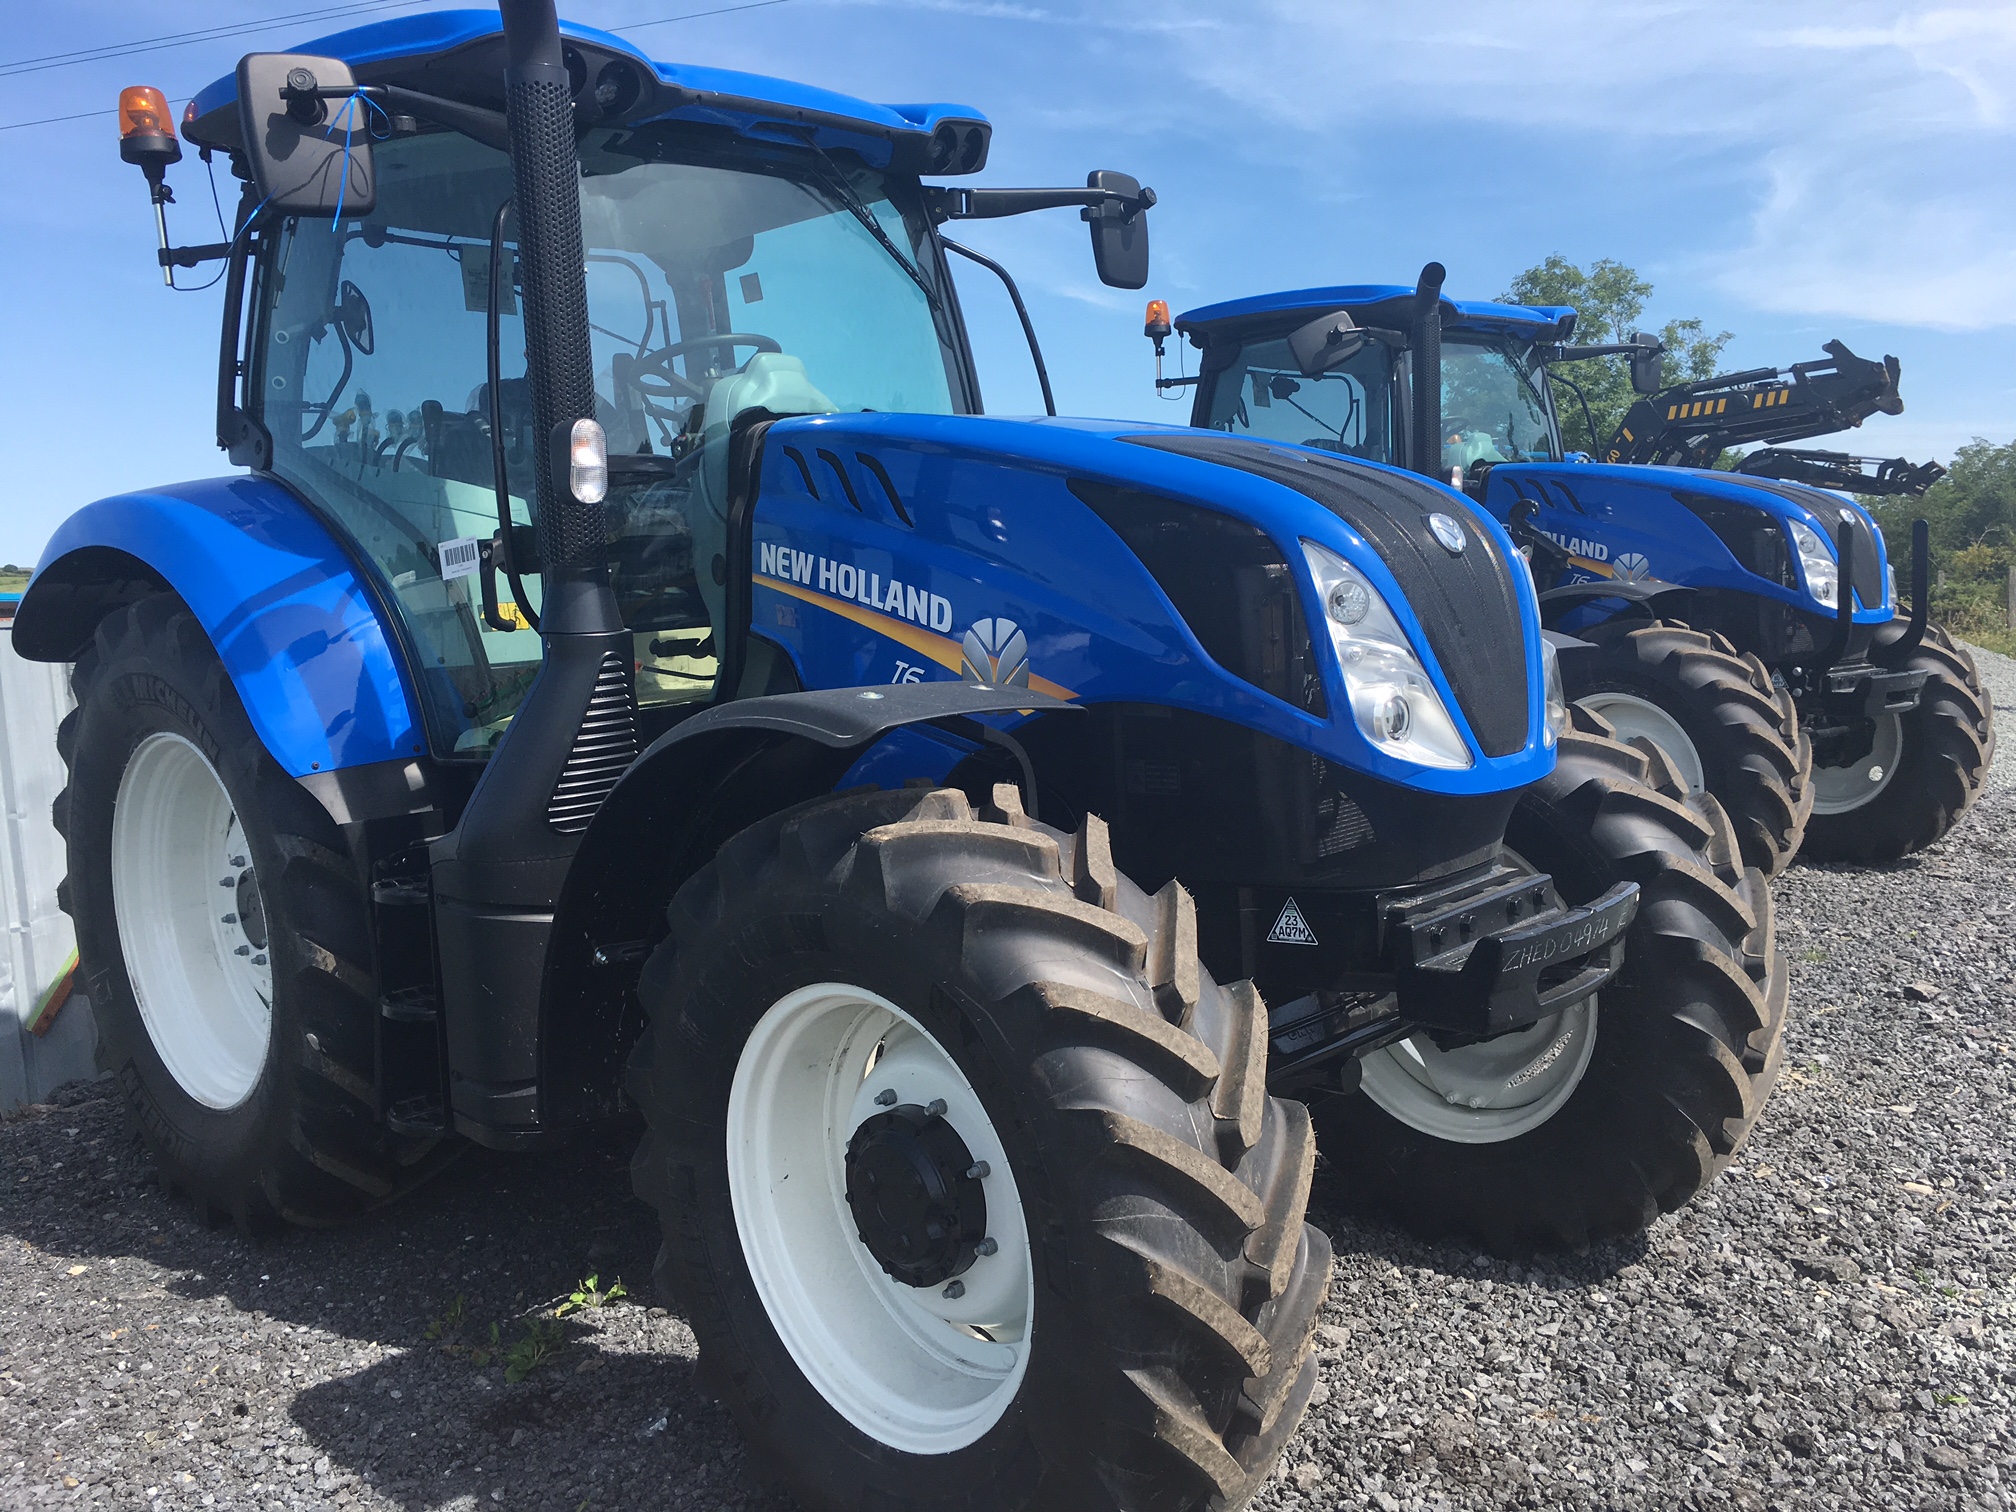 New holland t. New Holland т 9000. Трактор Нью Холланд т6. Трактор New Holland t8051. Т8040 New Holland.